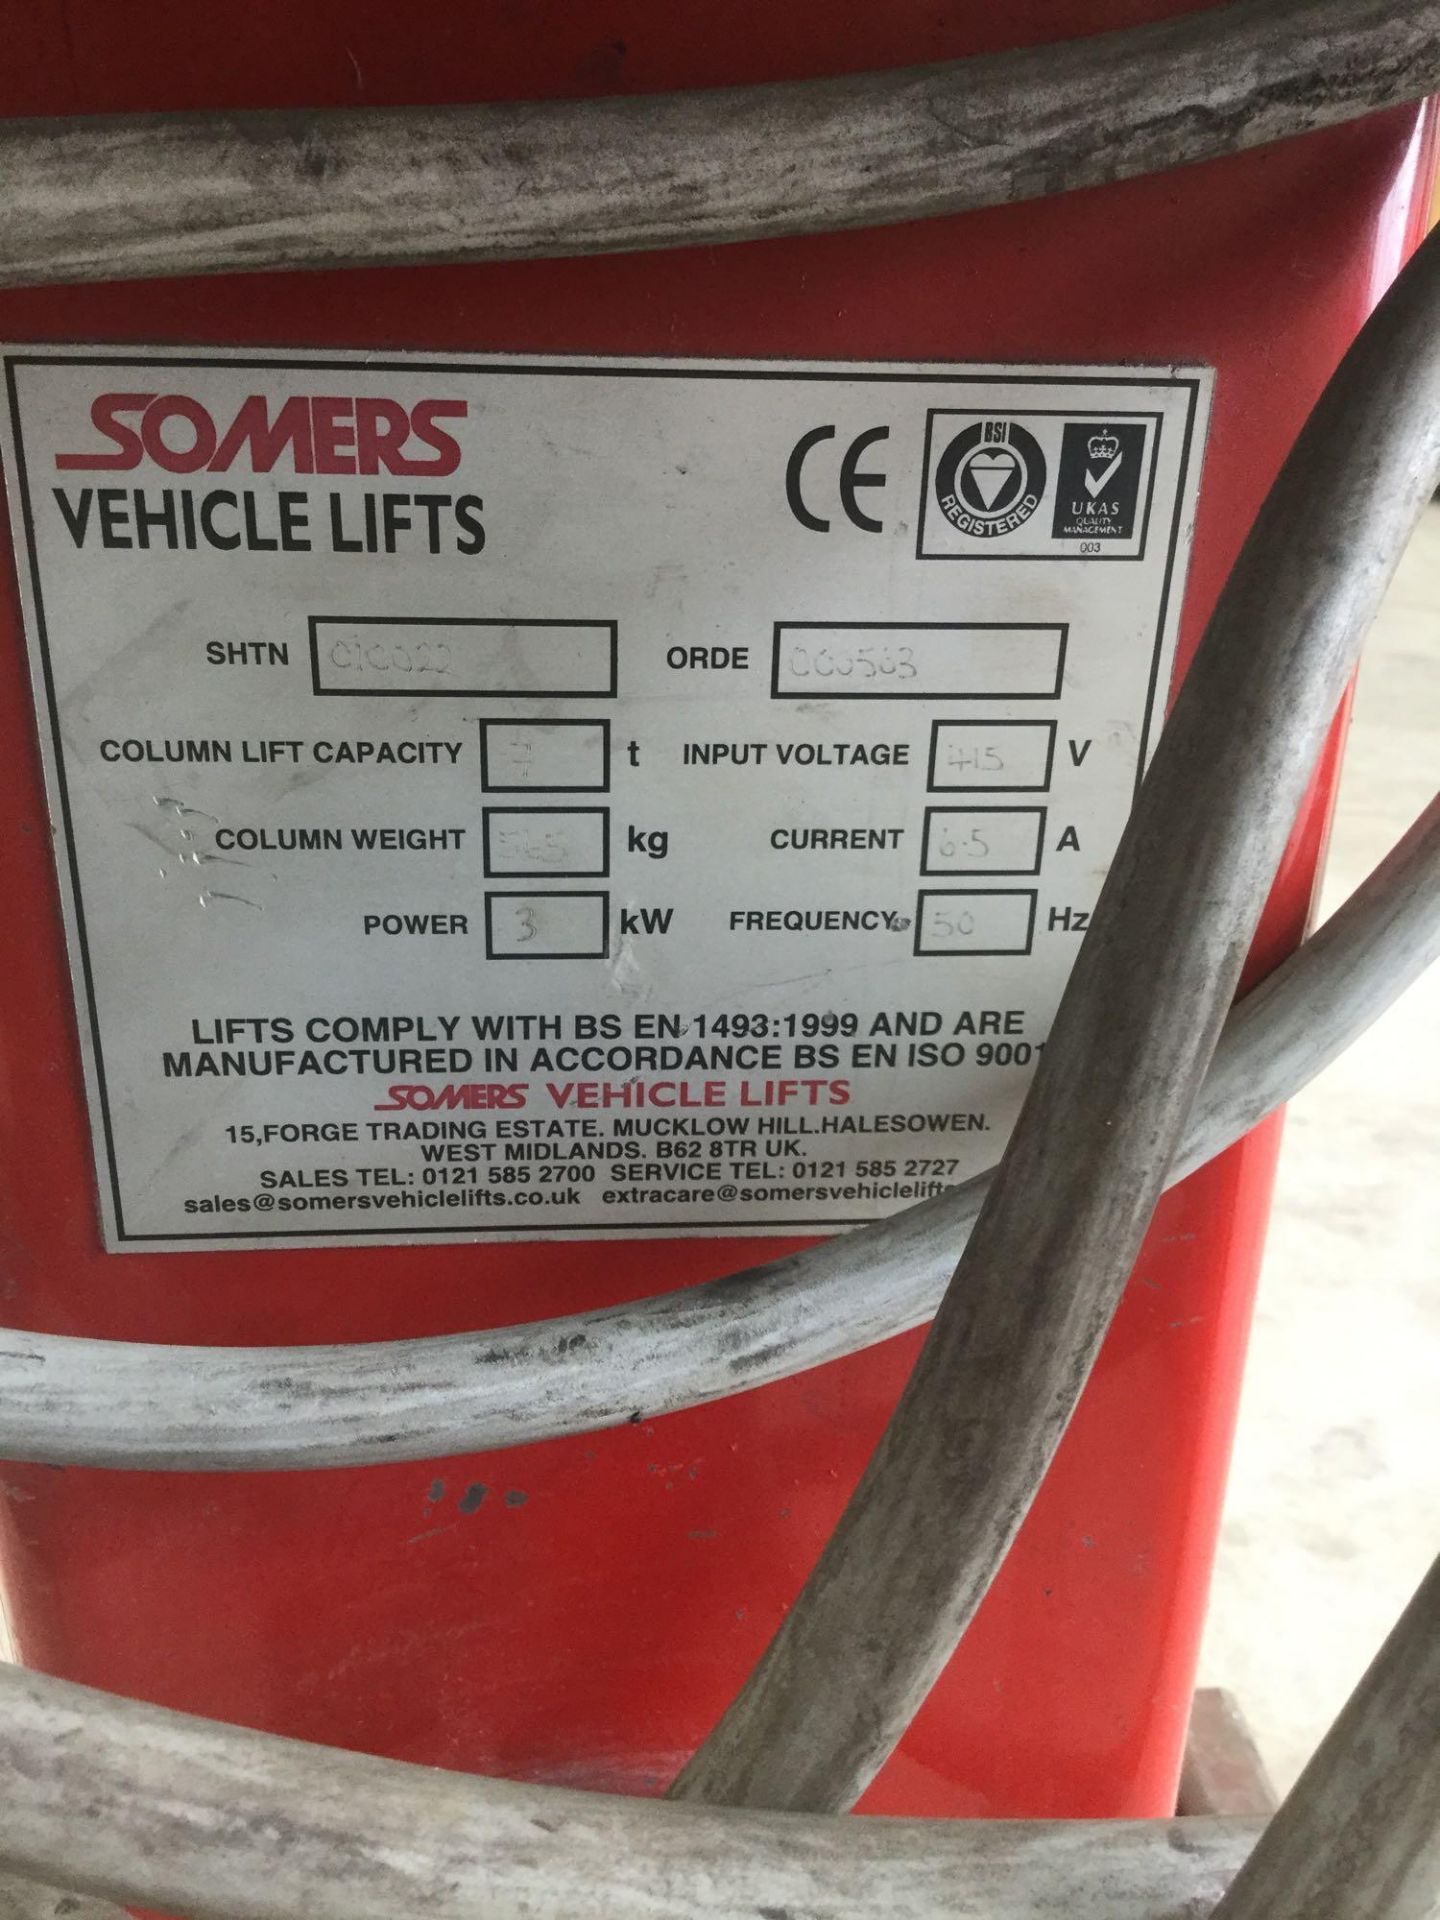 Somers svl 2000 mobile vehicle lift and axle stands - Image 5 of 16